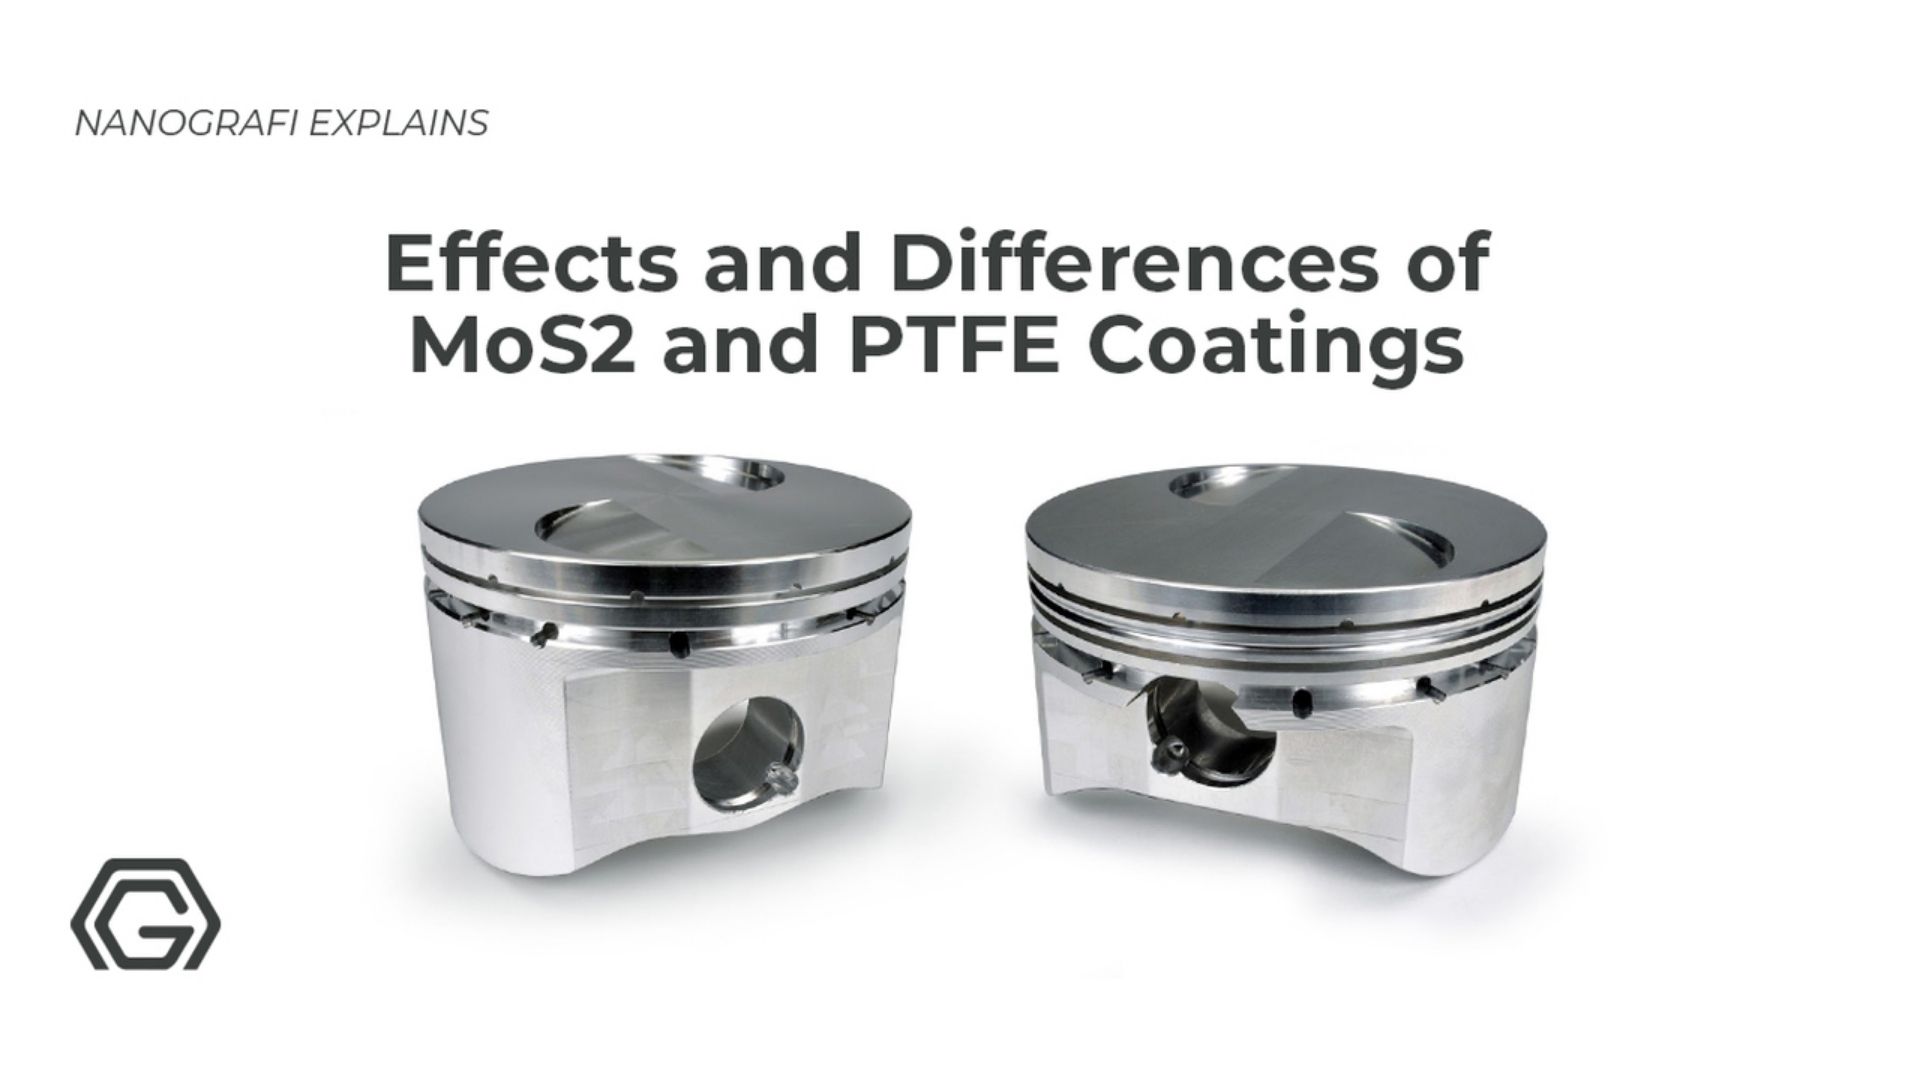 MoS2 and PTFE Coatings